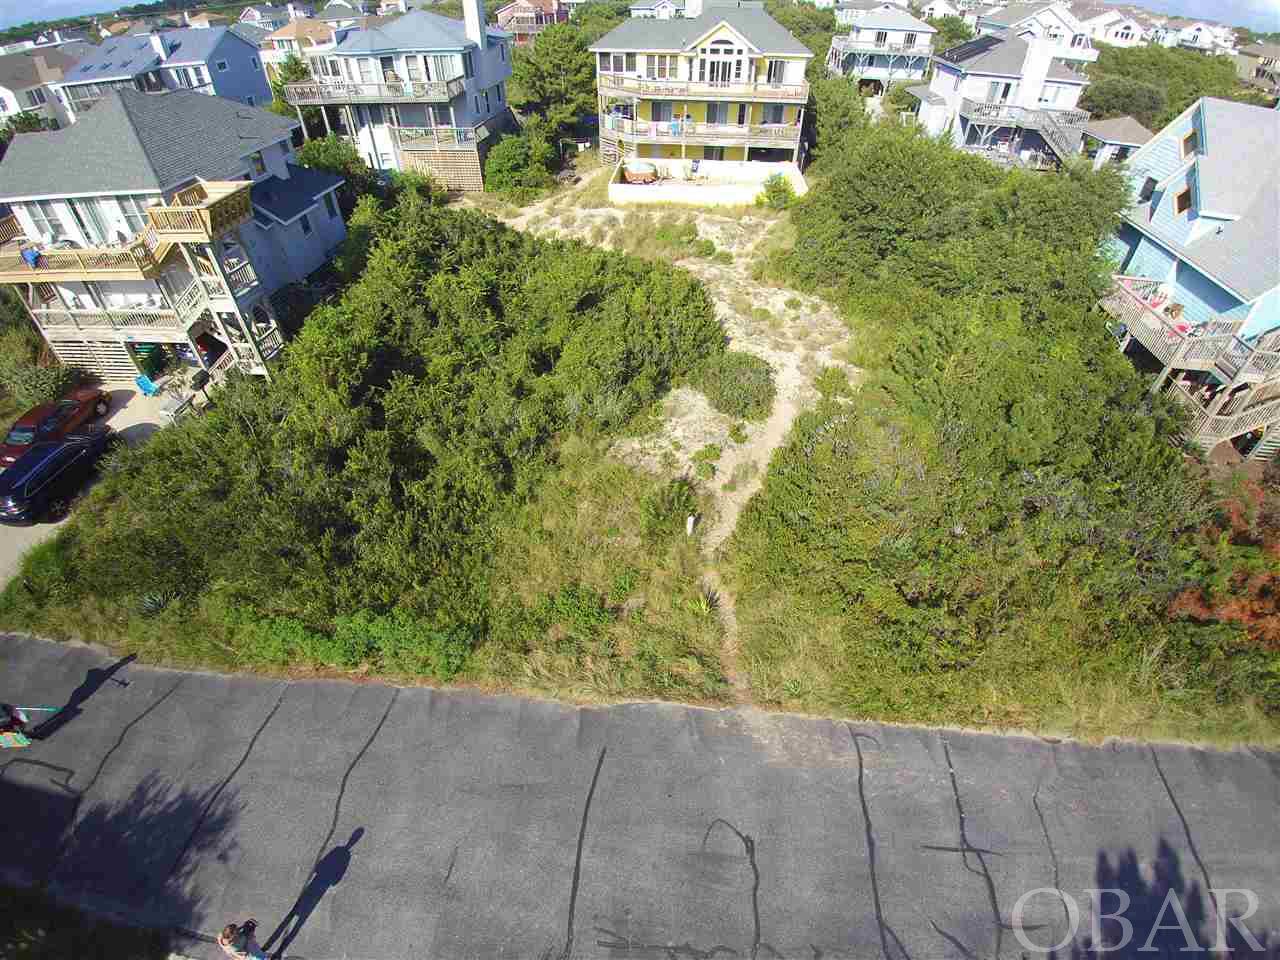 564 Porpoise Point, Corolla, NC 27927, ,Lots/land,For sale,Porpoise Point,99520